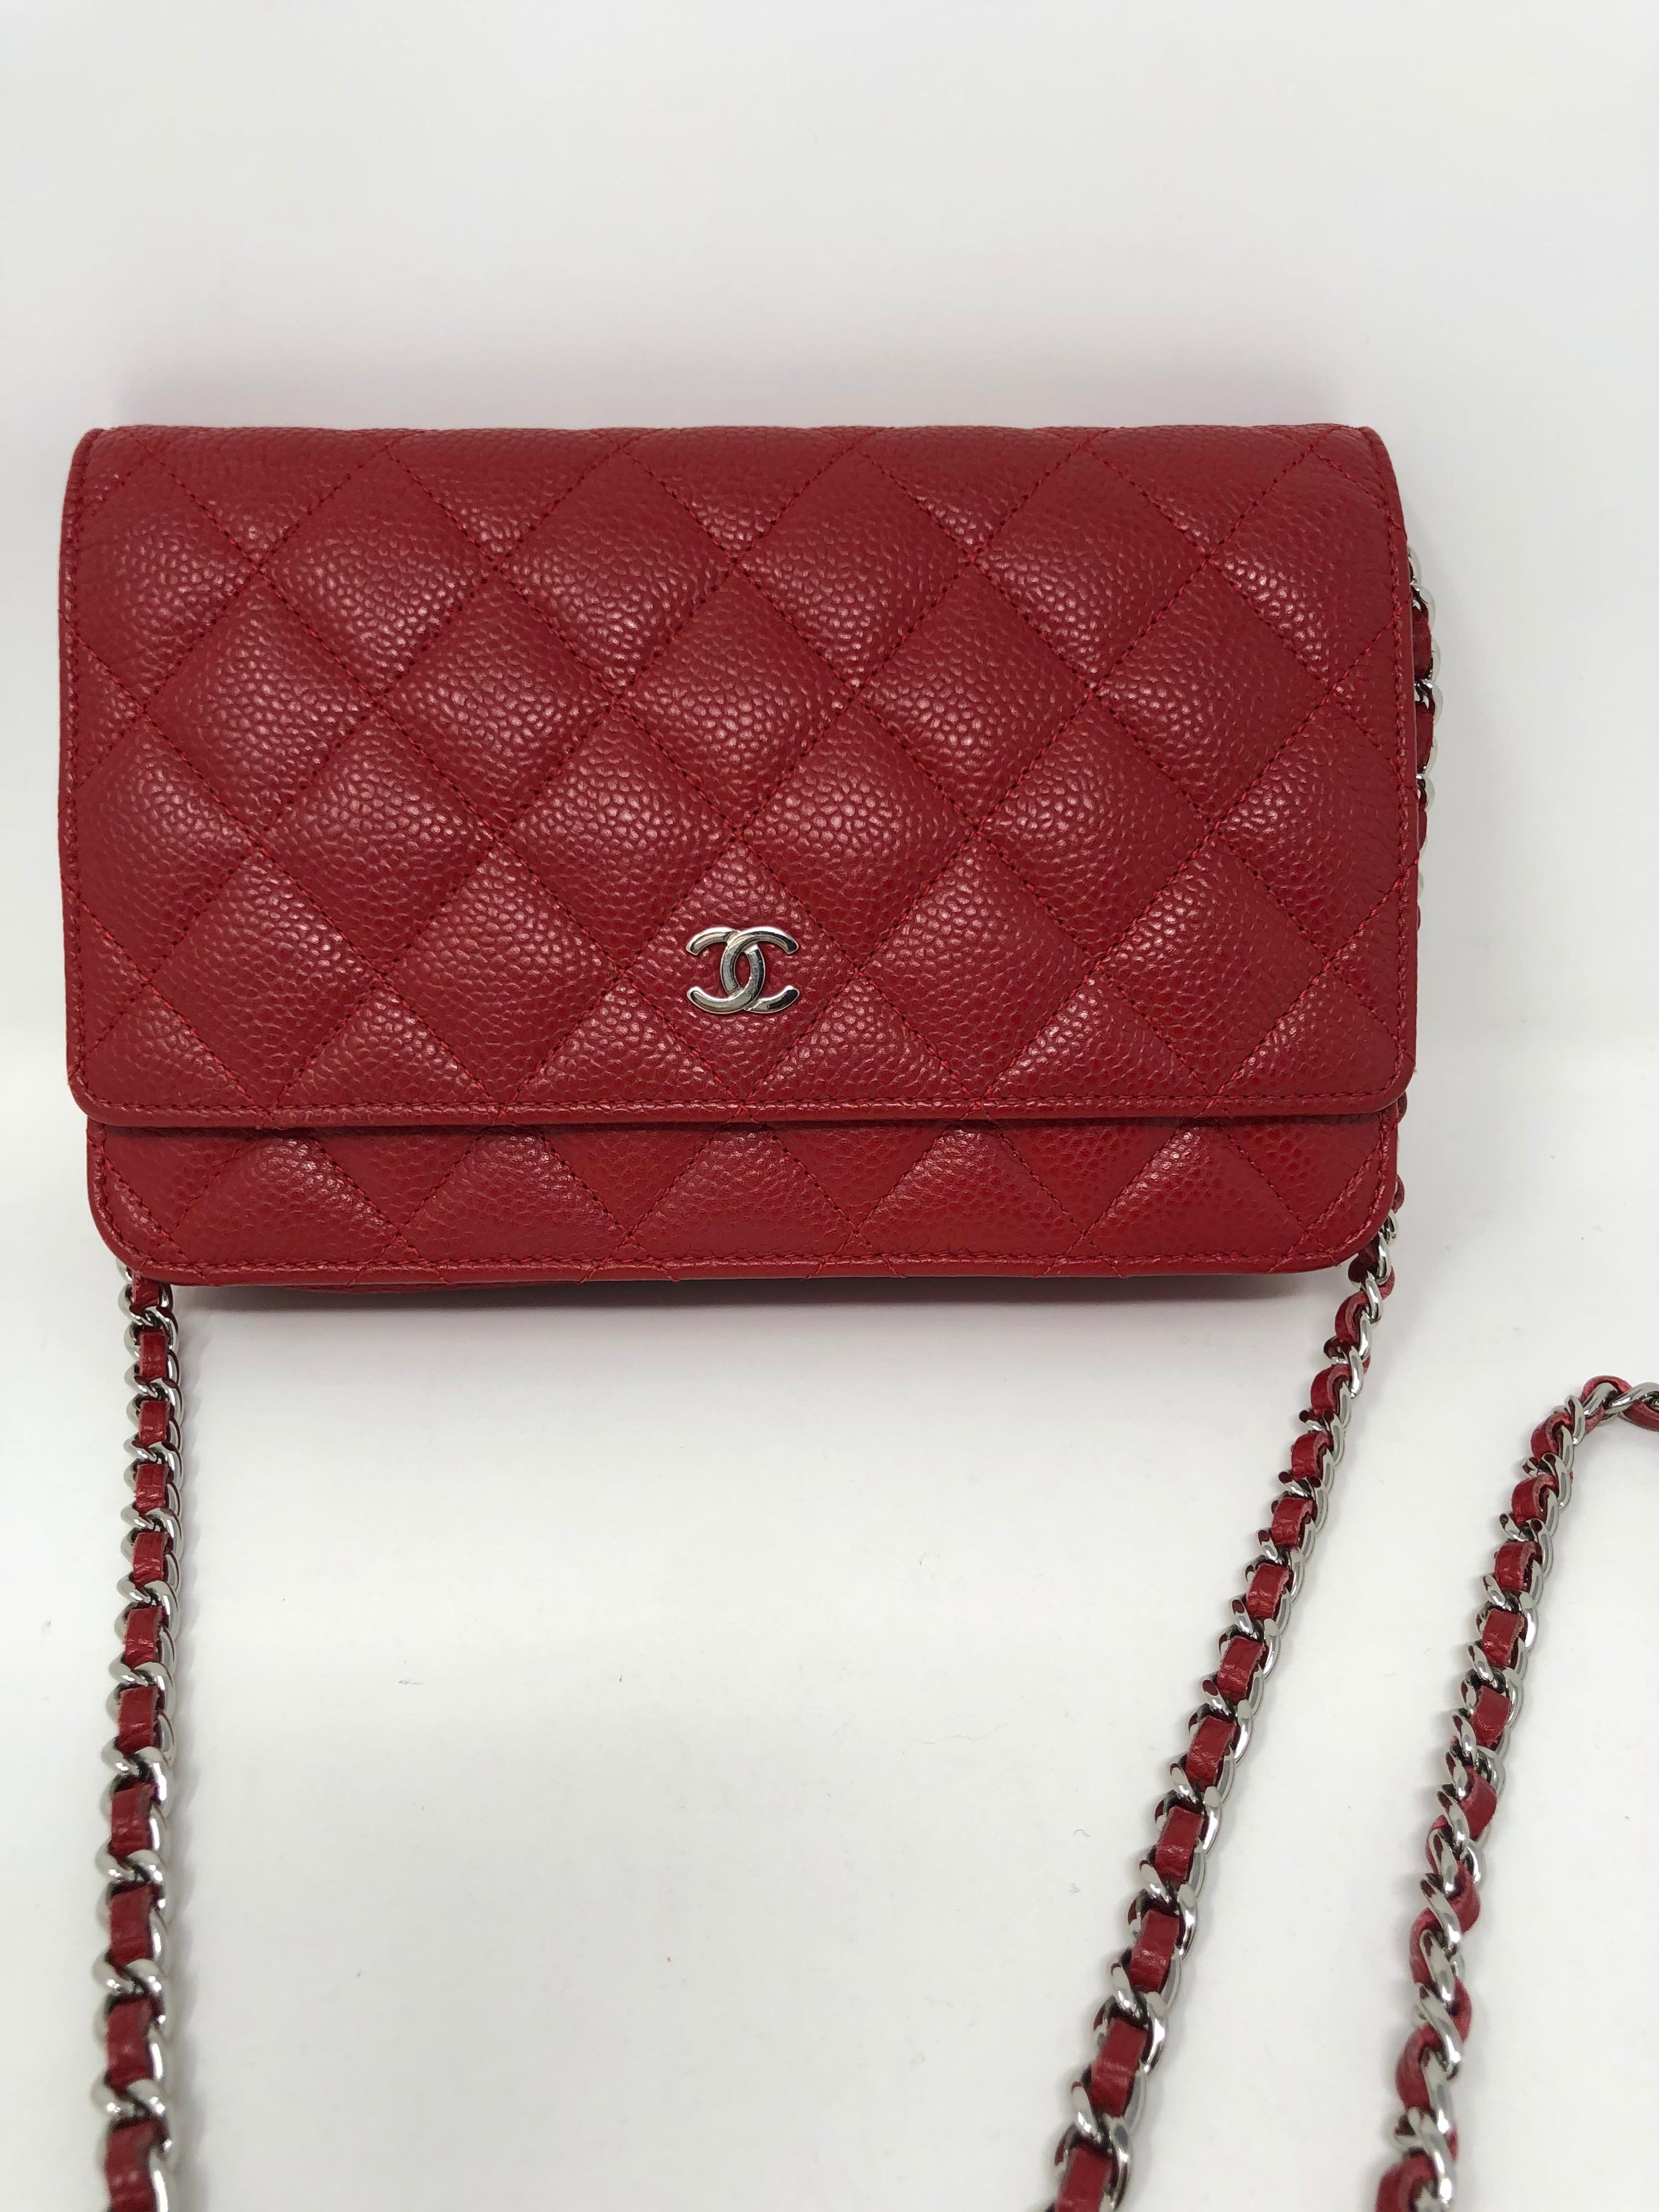 Chanel Red Caviar Wallet On A Chain Bag. Silver hardware. Can be worn as a crossbody or a clutch. Excellent condition. Includes dust cover. Guaranteed authentic. 